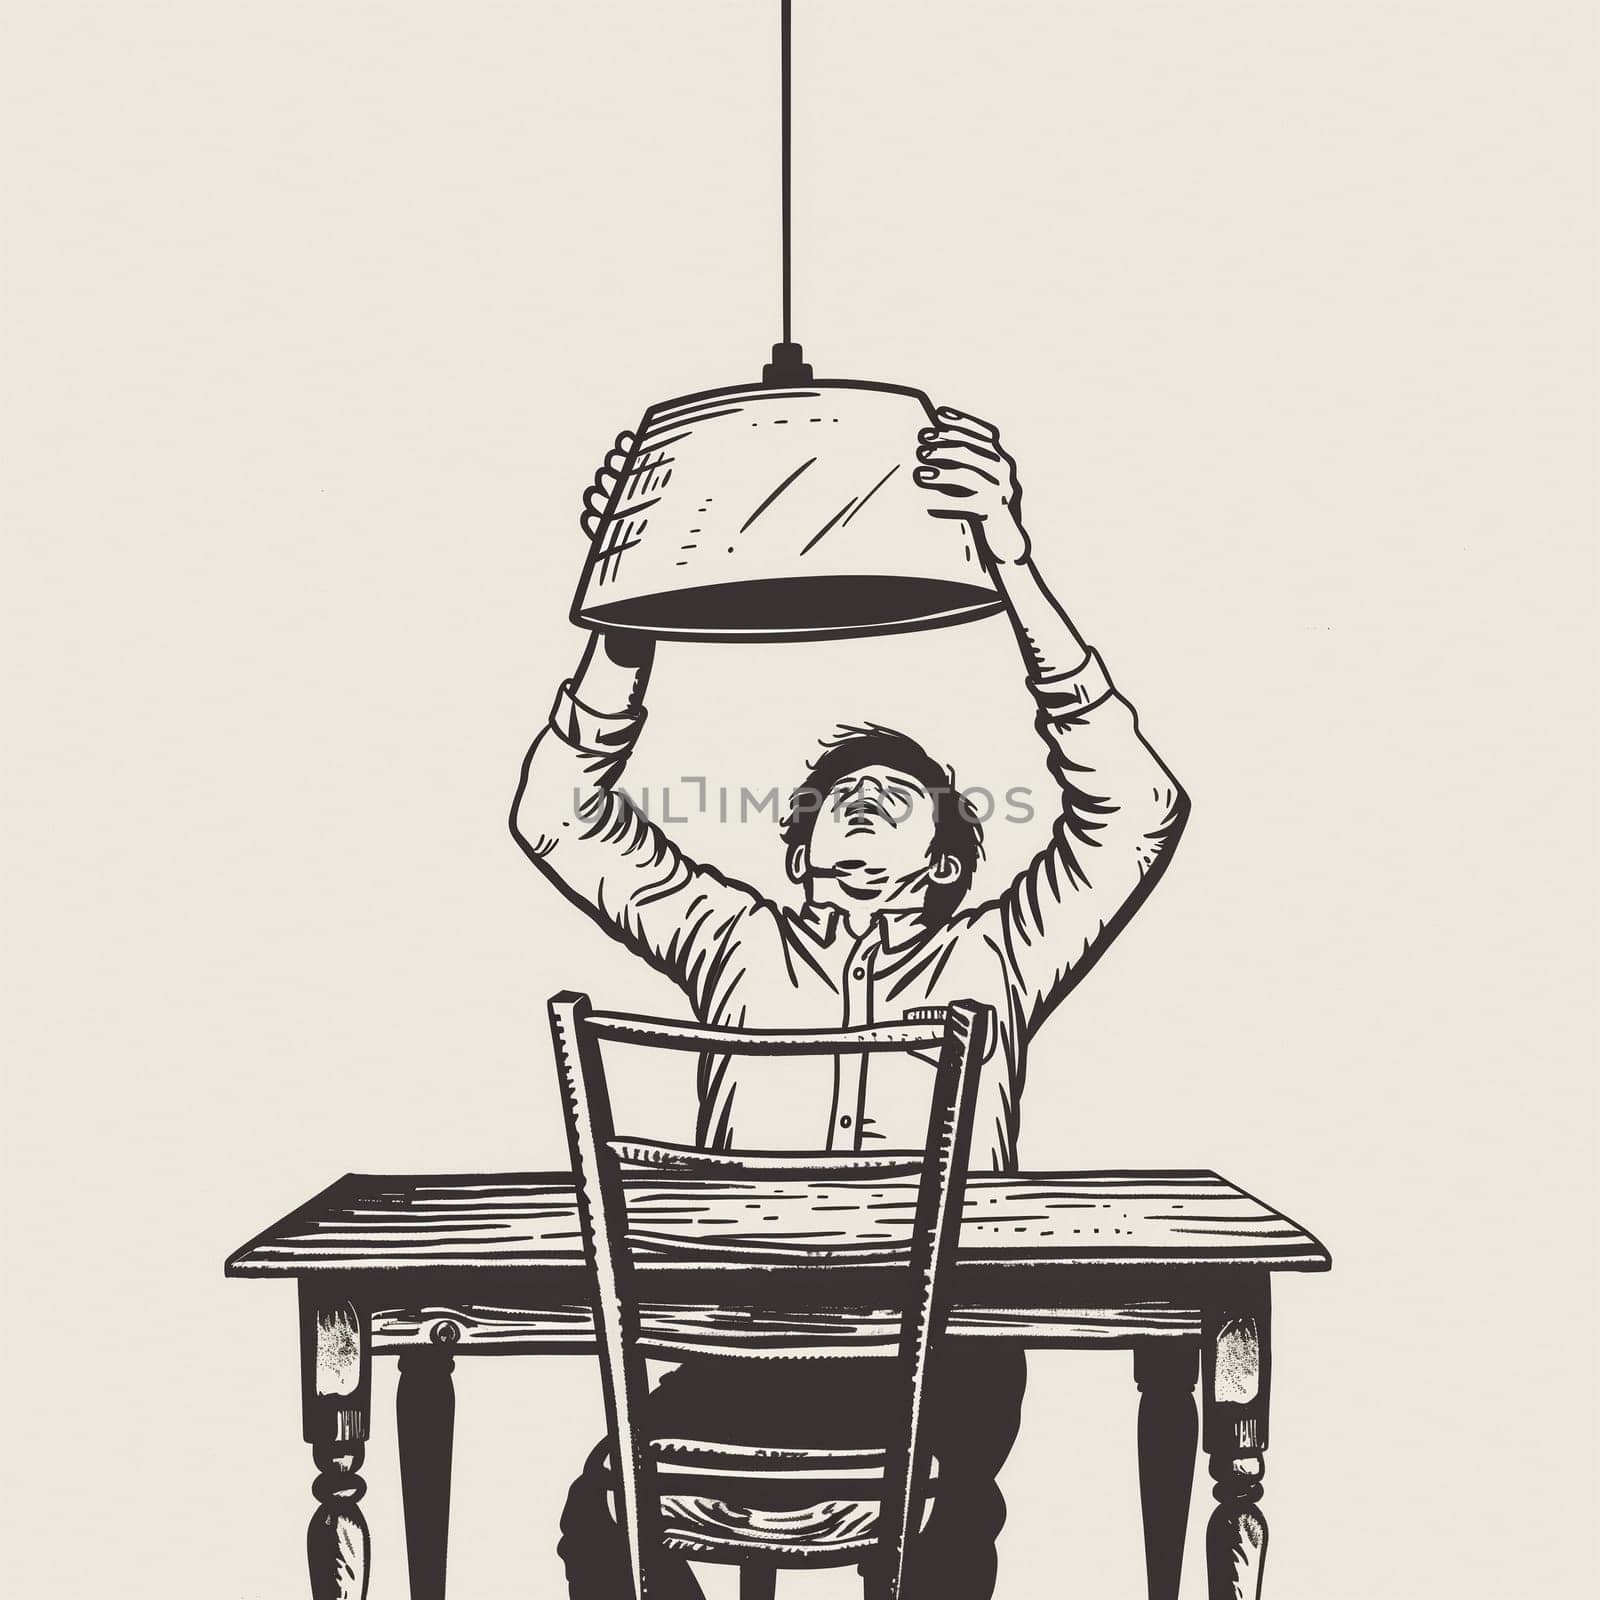 A man looks under the chandelier. High quality illustration